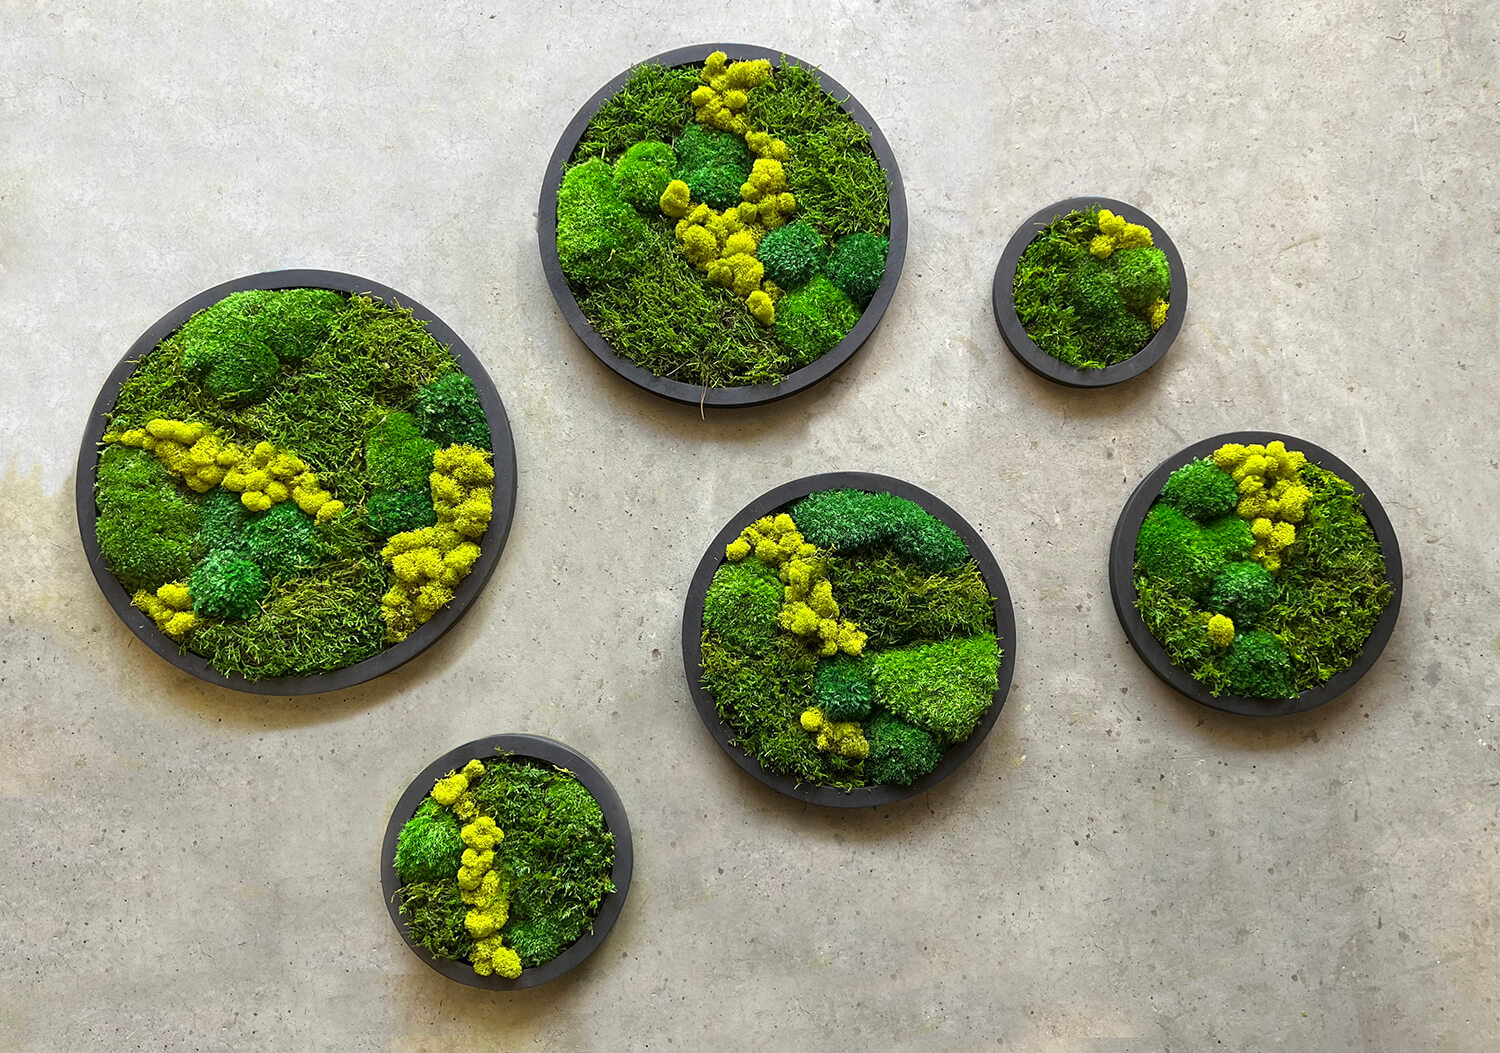 Nature's Palette Unveiled: Cushion moss, fern moss, and reindeer moss intertwine in this stunning round moss art, creating a lush and soothing display of botanical elegance.